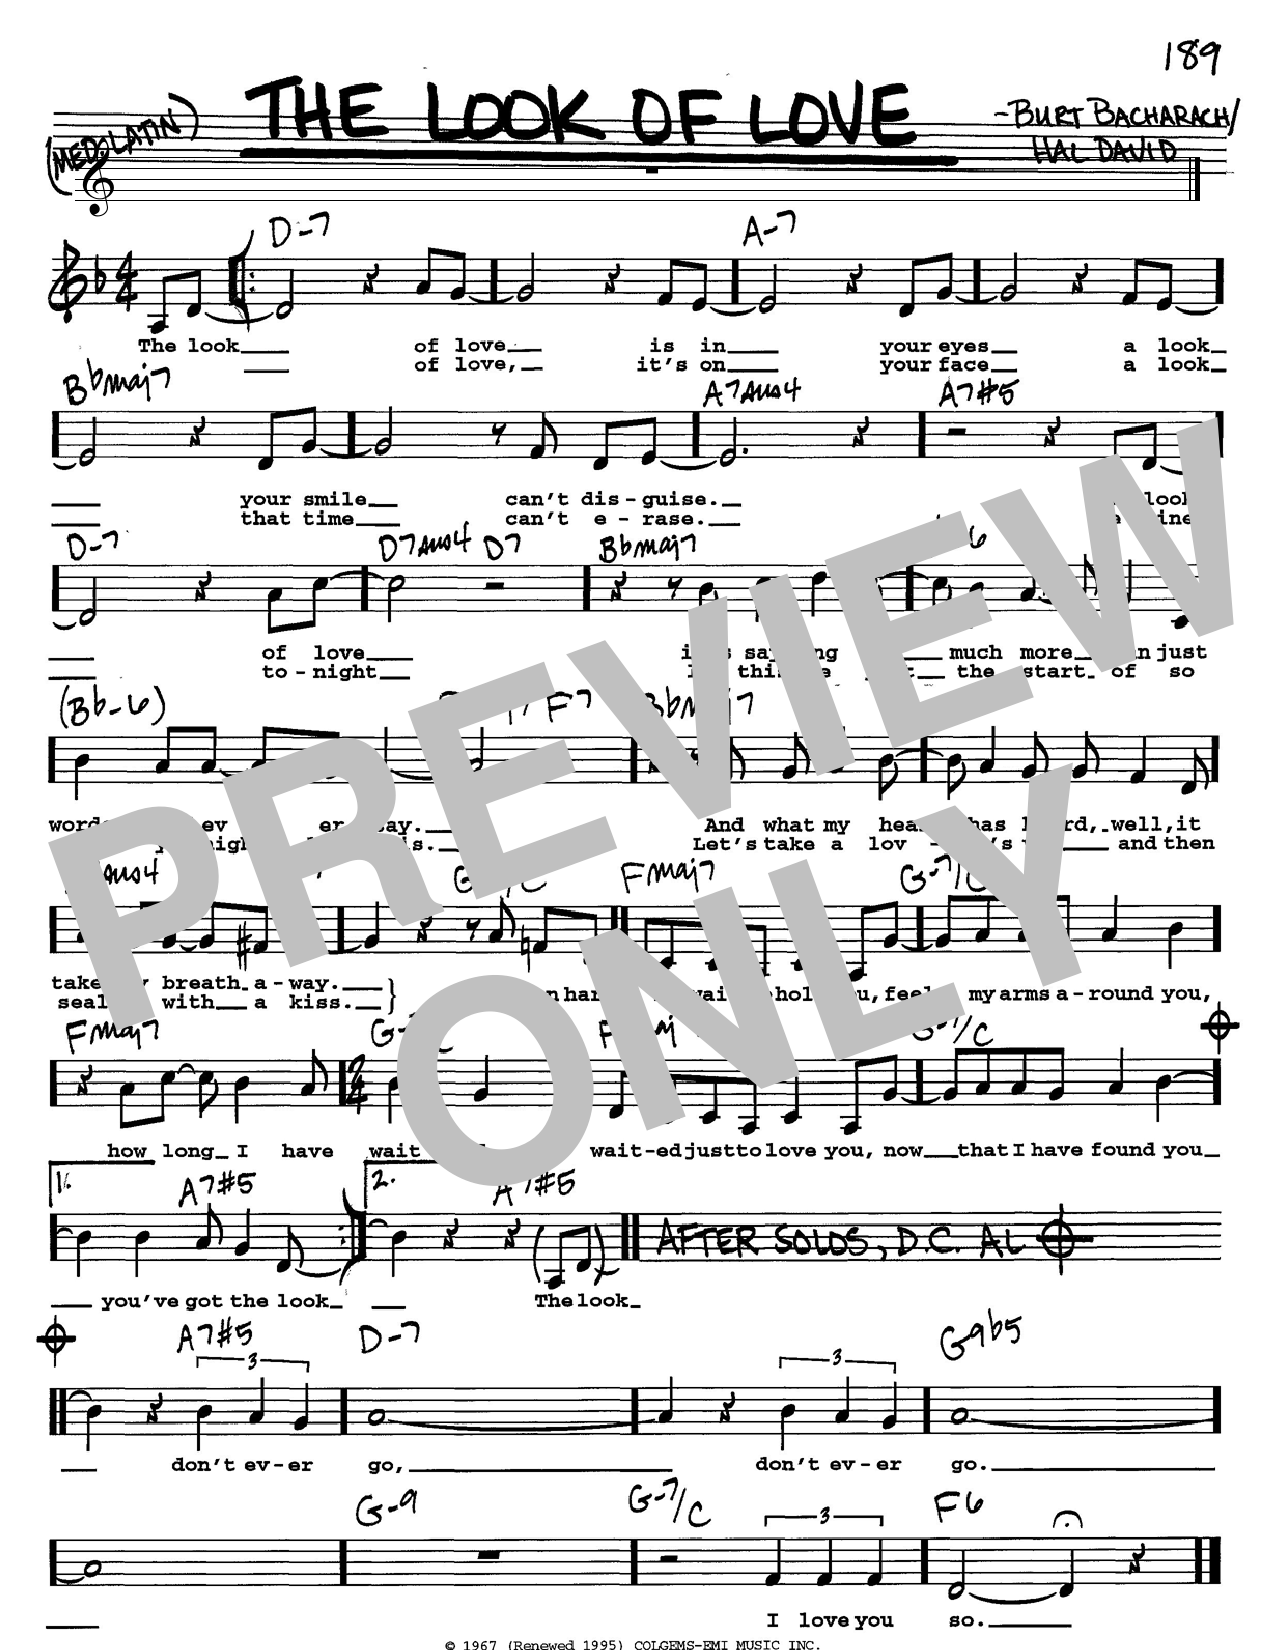 Diana Krall The Look Of Love sheet music notes and chords. Download Printable PDF.